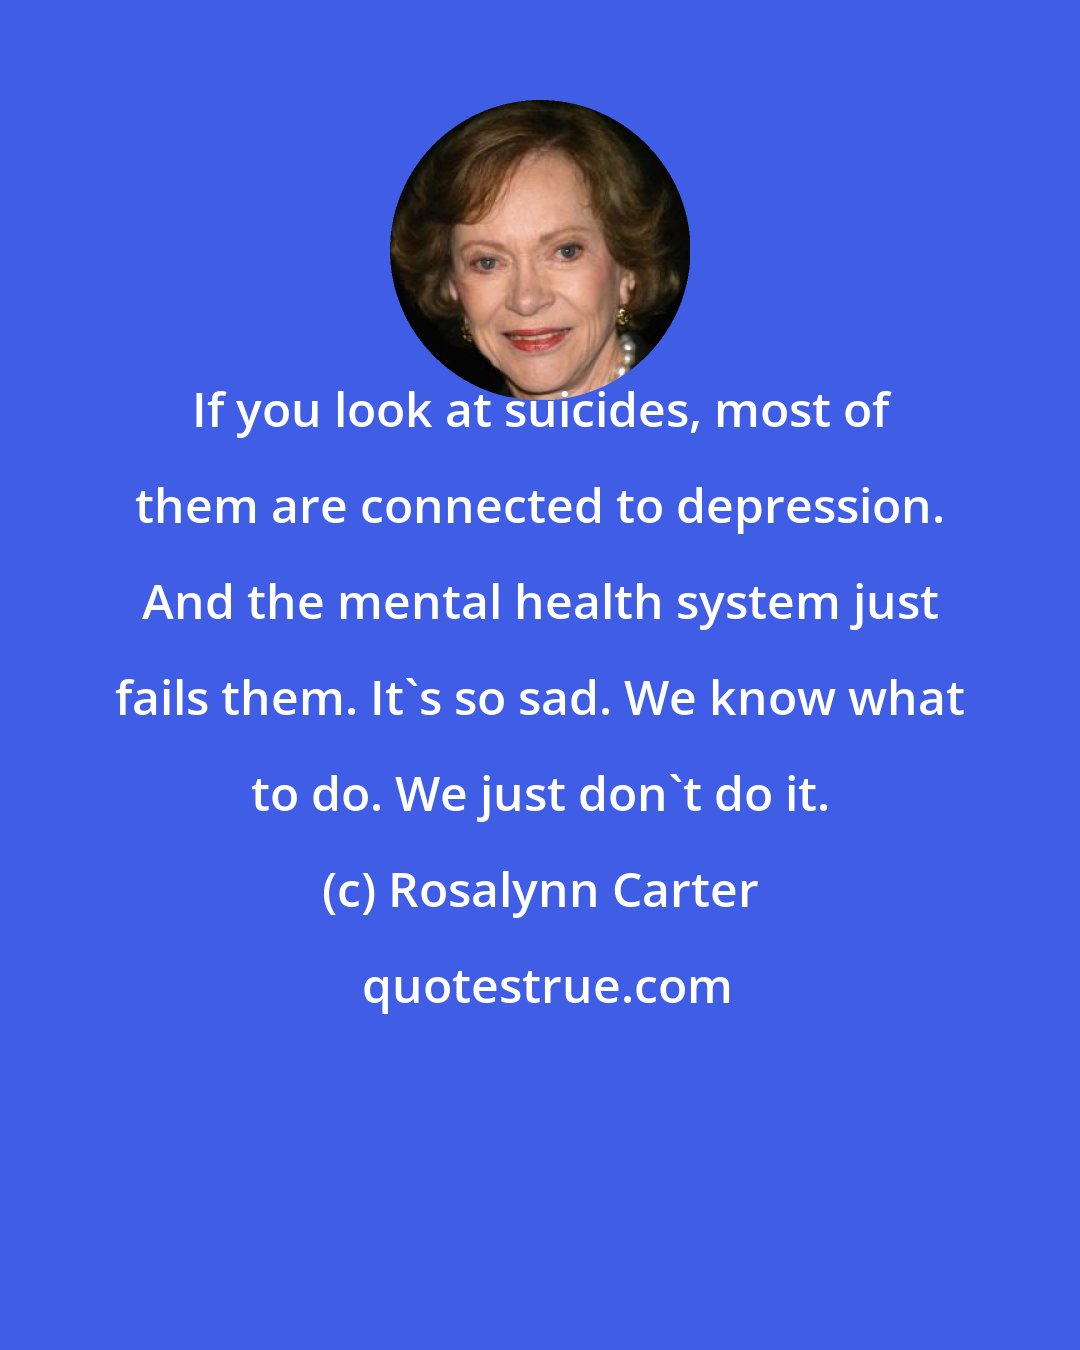 Rosalynn Carter: If you look at suicides, most of them are connected to depression. And the mental health system just fails them. It's so sad. We know what to do. We just don't do it.